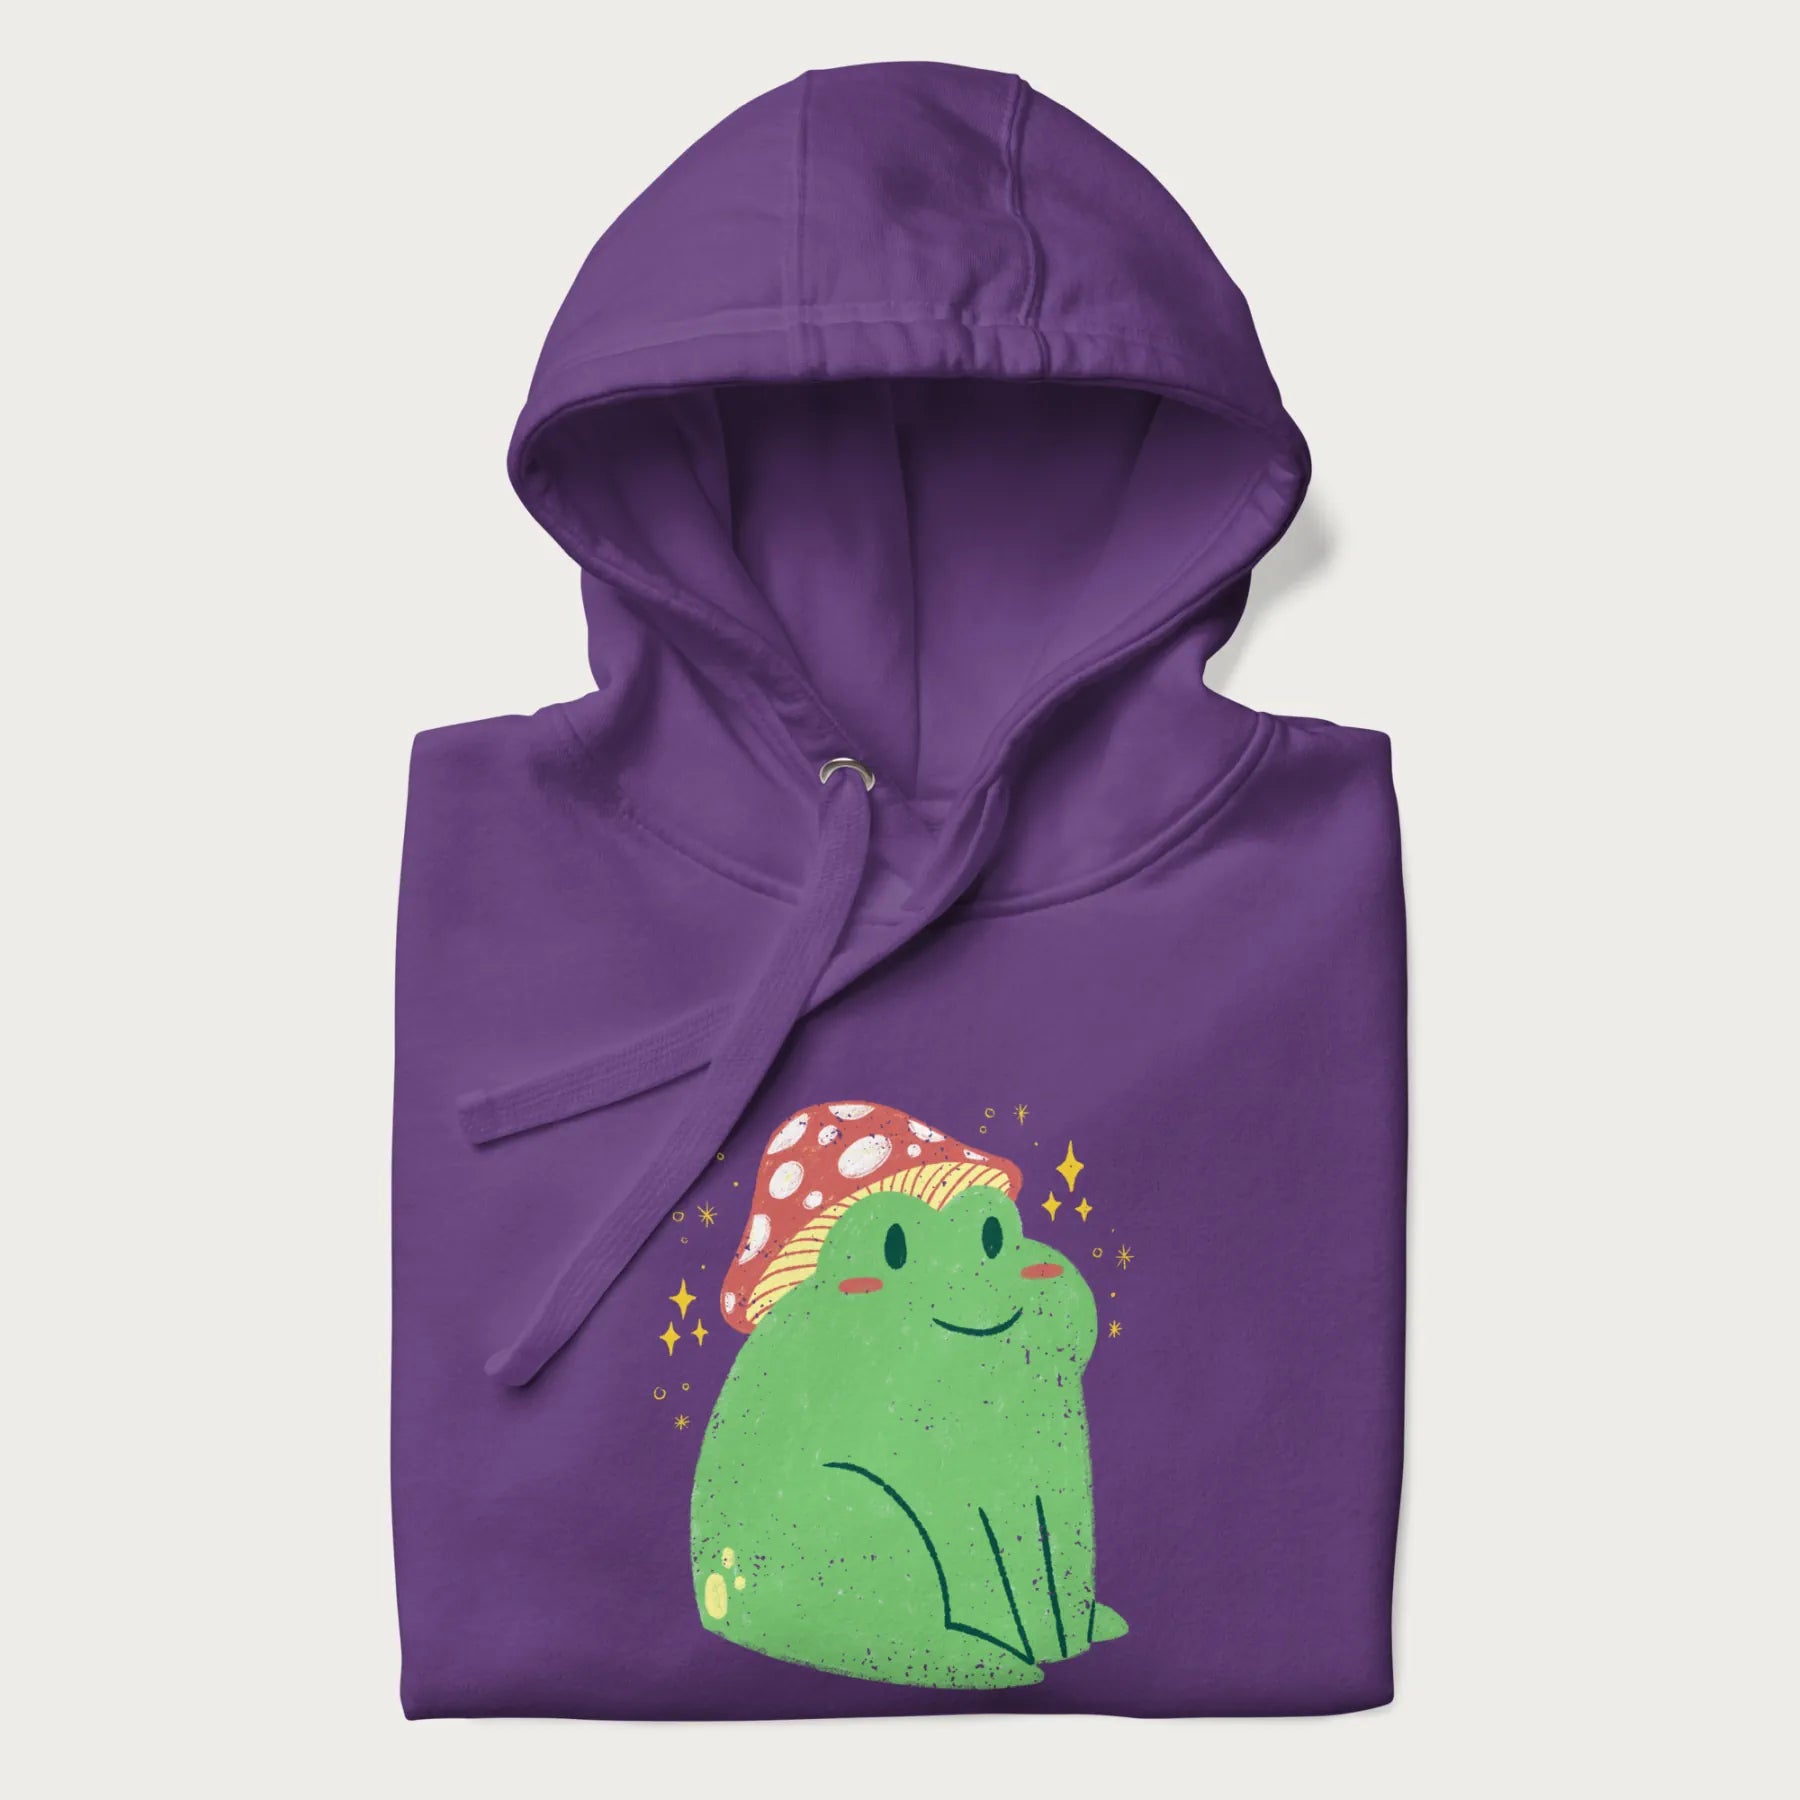 Folded purple hoodie with a graphic of a green frog wearing a mushroom cap surrounded by stars.